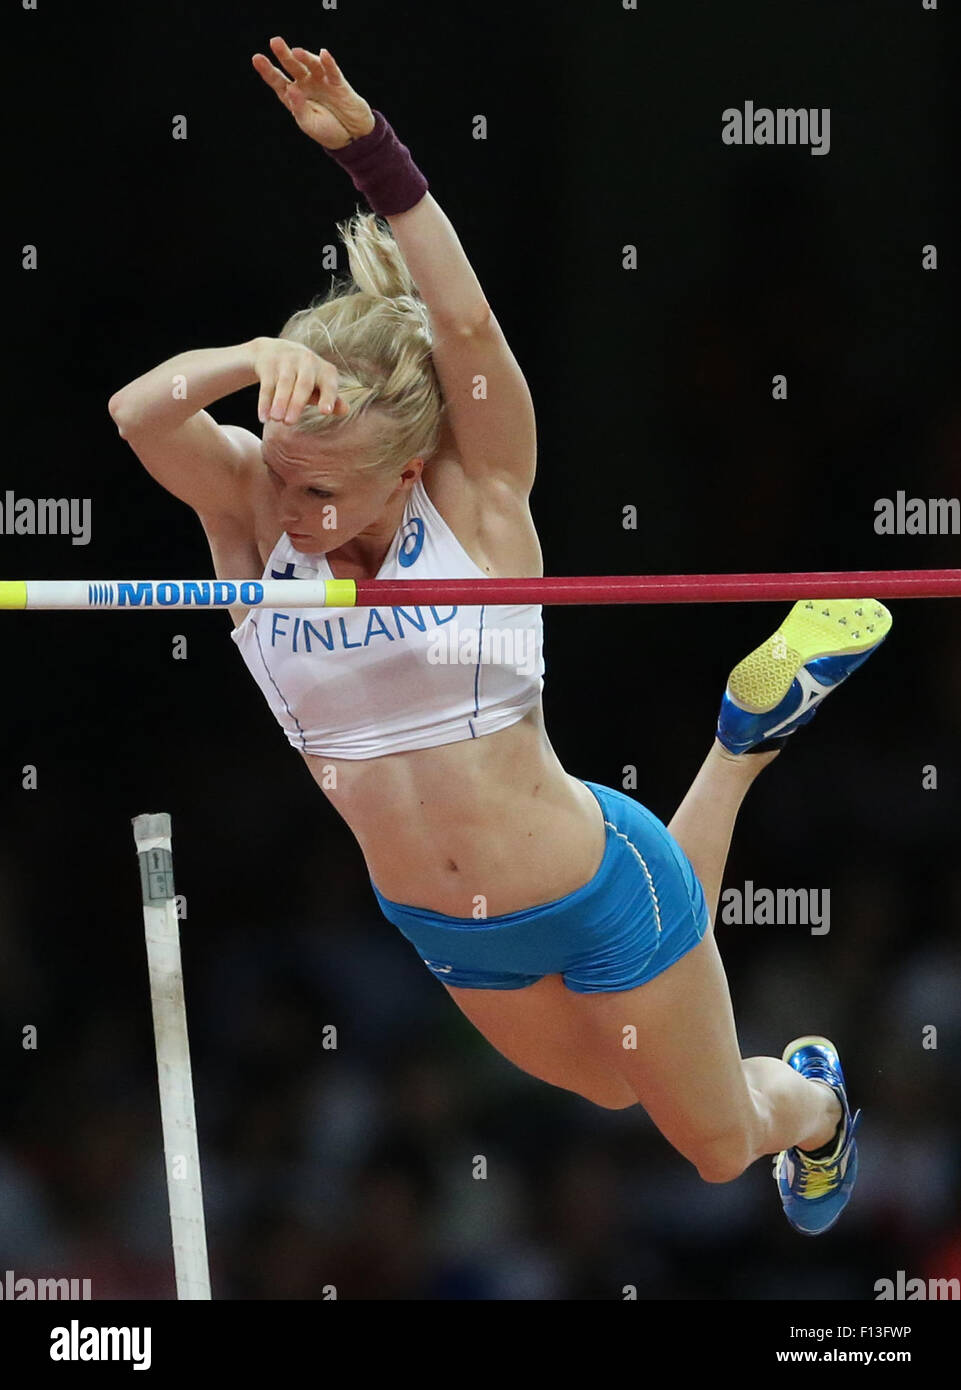 Beijing, China. 26th August, 2015. Minna Nikkanen of Finland in action during the women's Pole Vault final of the Beijing 2015 IAAF World Championships at the National Stadium, also known as Bird's Nest, in Beijing, China, 26 August 2015. Credit:  dpa picture alliance/Alamy Live News Stock Photo